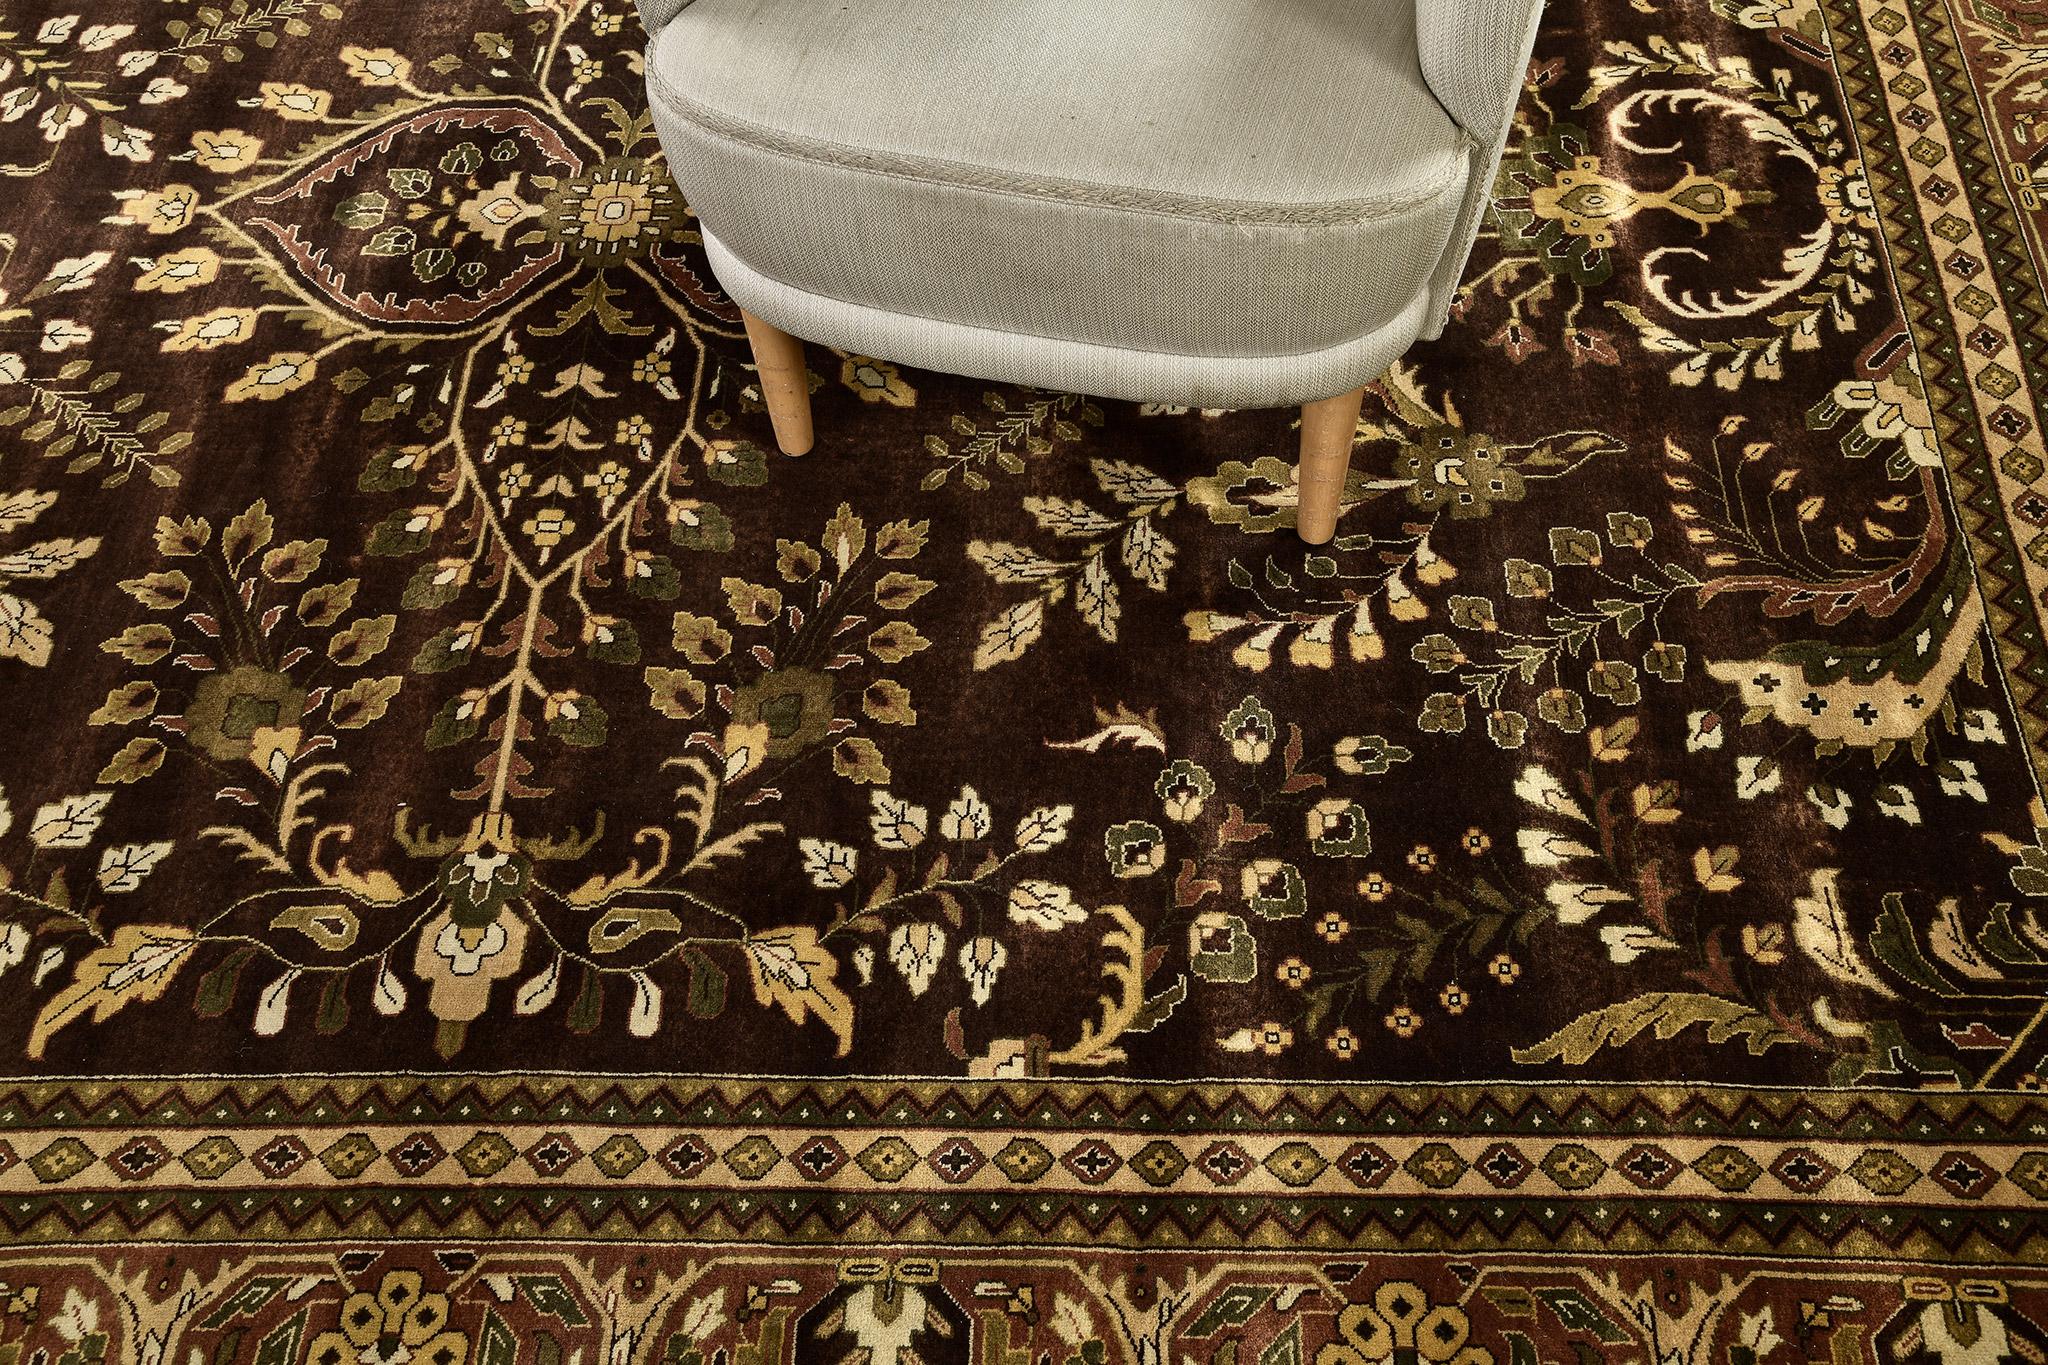 A luxurious Indo Jaipur Agra Rug features excellent elements that the color schemes stand out among the rest. It creates a delicate balance of gold and black between the value of motifs and the overall impression of the design. Outstanding addition